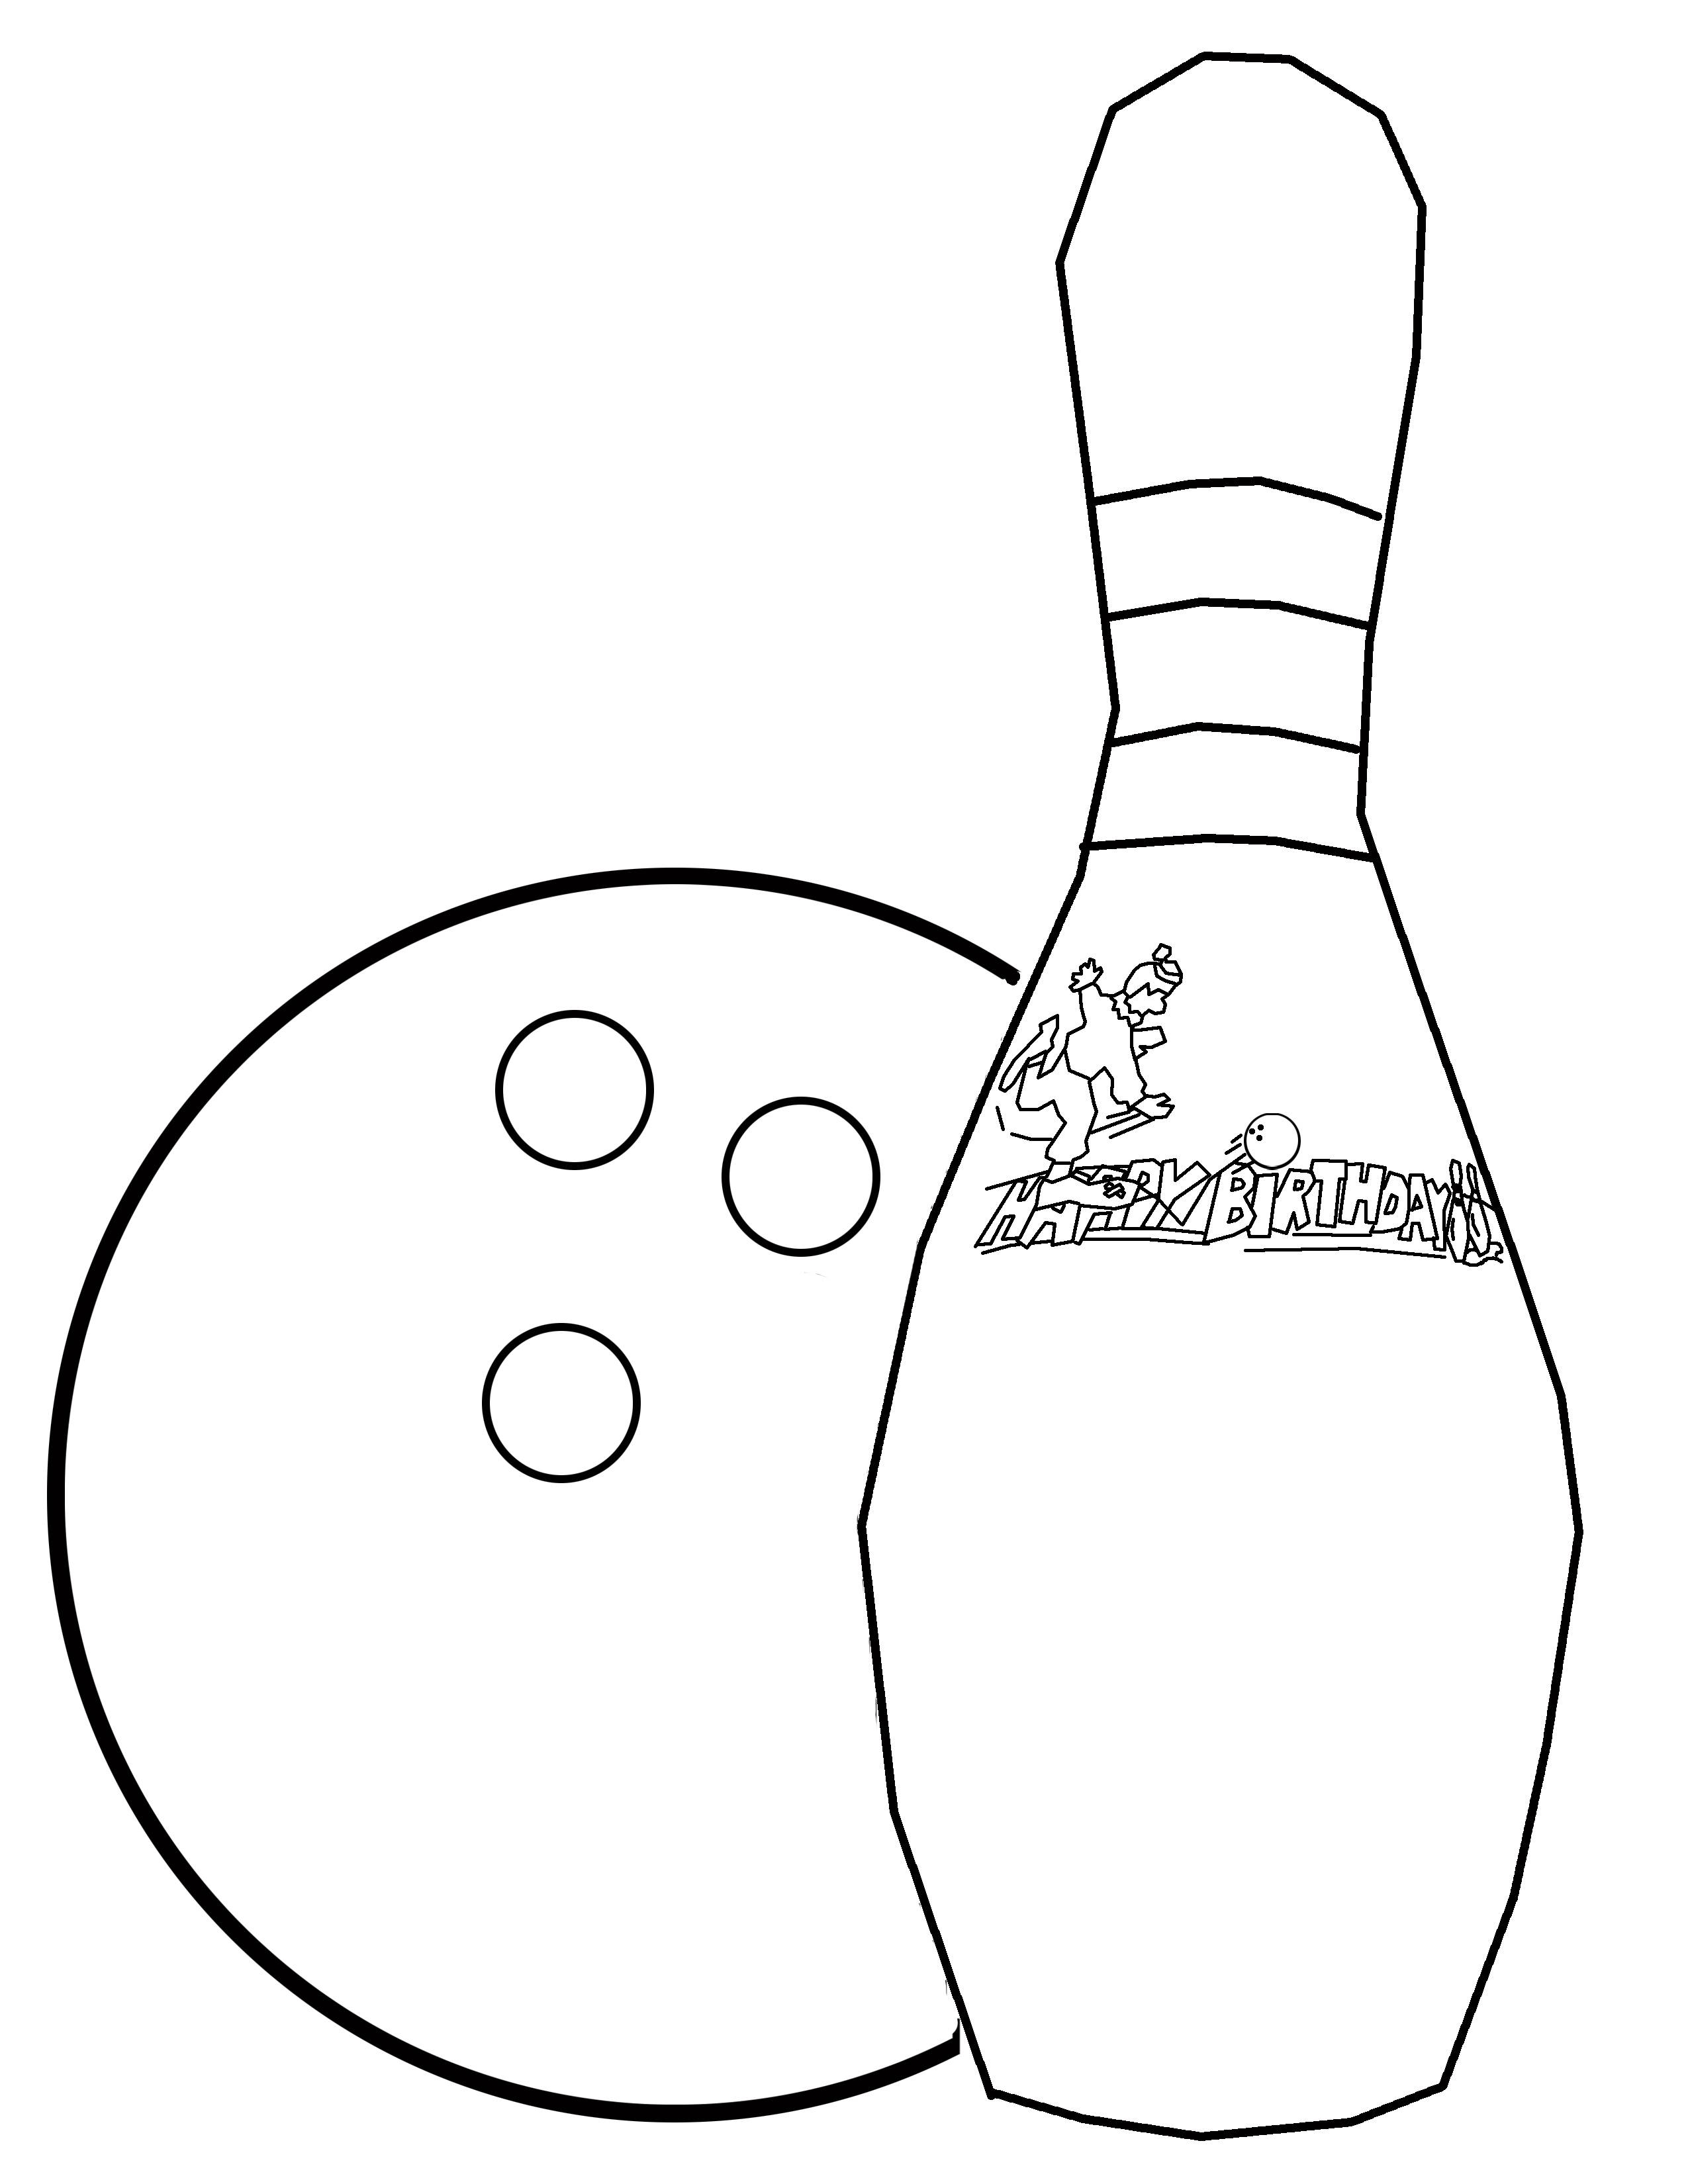 free-how-to-draw-a-bowling-pin-download-free-how-to-draw-a-bowling-pin